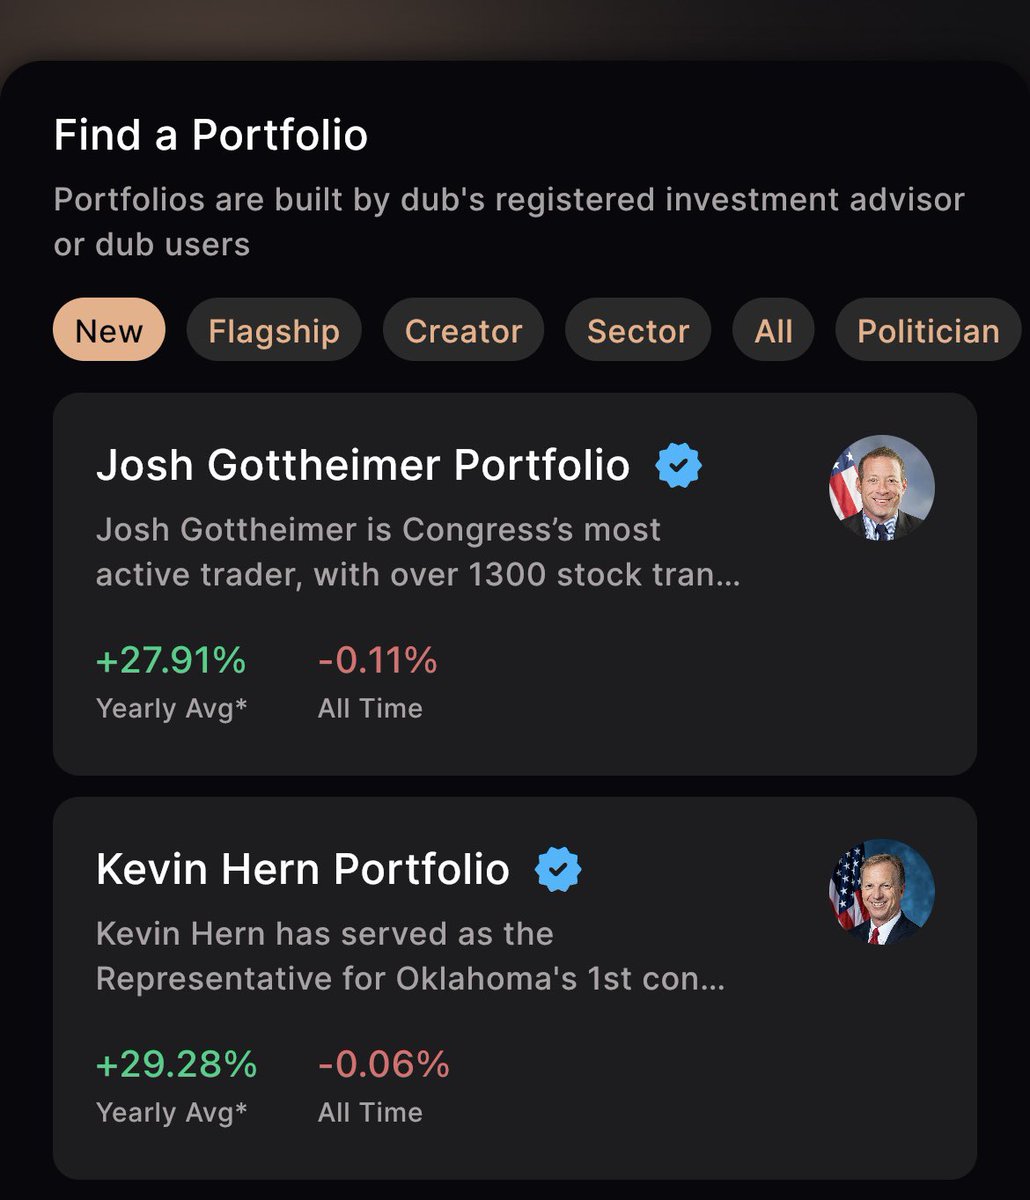 🚨There are two new MAJOR politicians on dub. Kevin Hern: Wealthiest congressman with $361M net worth. Josh Gottheimer: Most active trader in Congress with $100M+ trade volume and almost 500 trades this year alone. Copy their portfolios on dub TODAY.